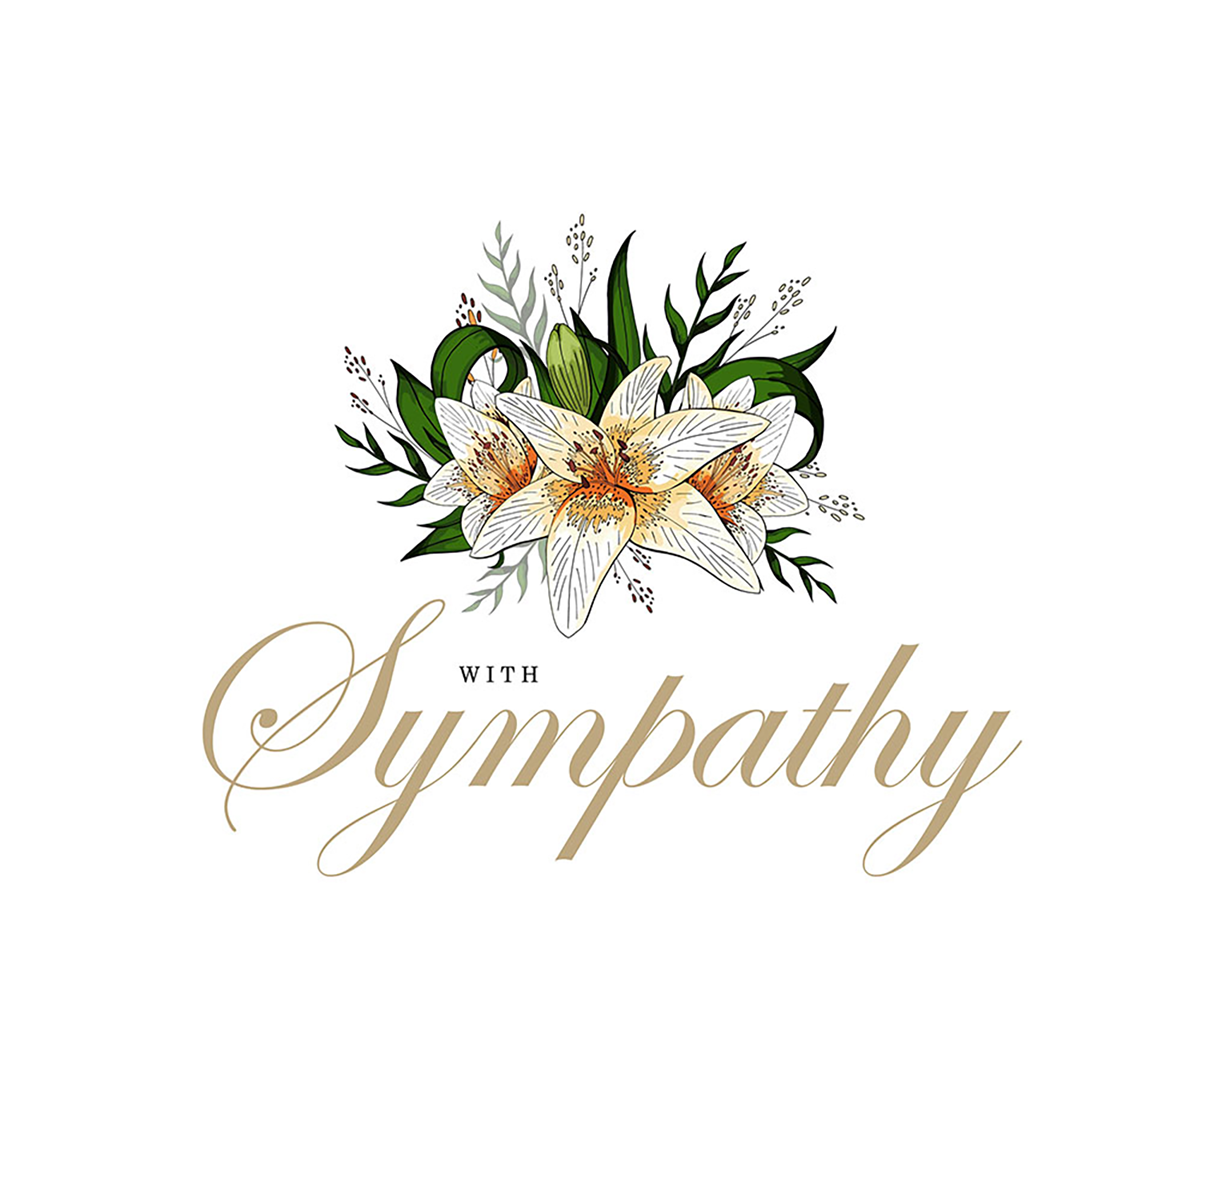 Our sympathy gift baskets are the perfect gift during a difficult time